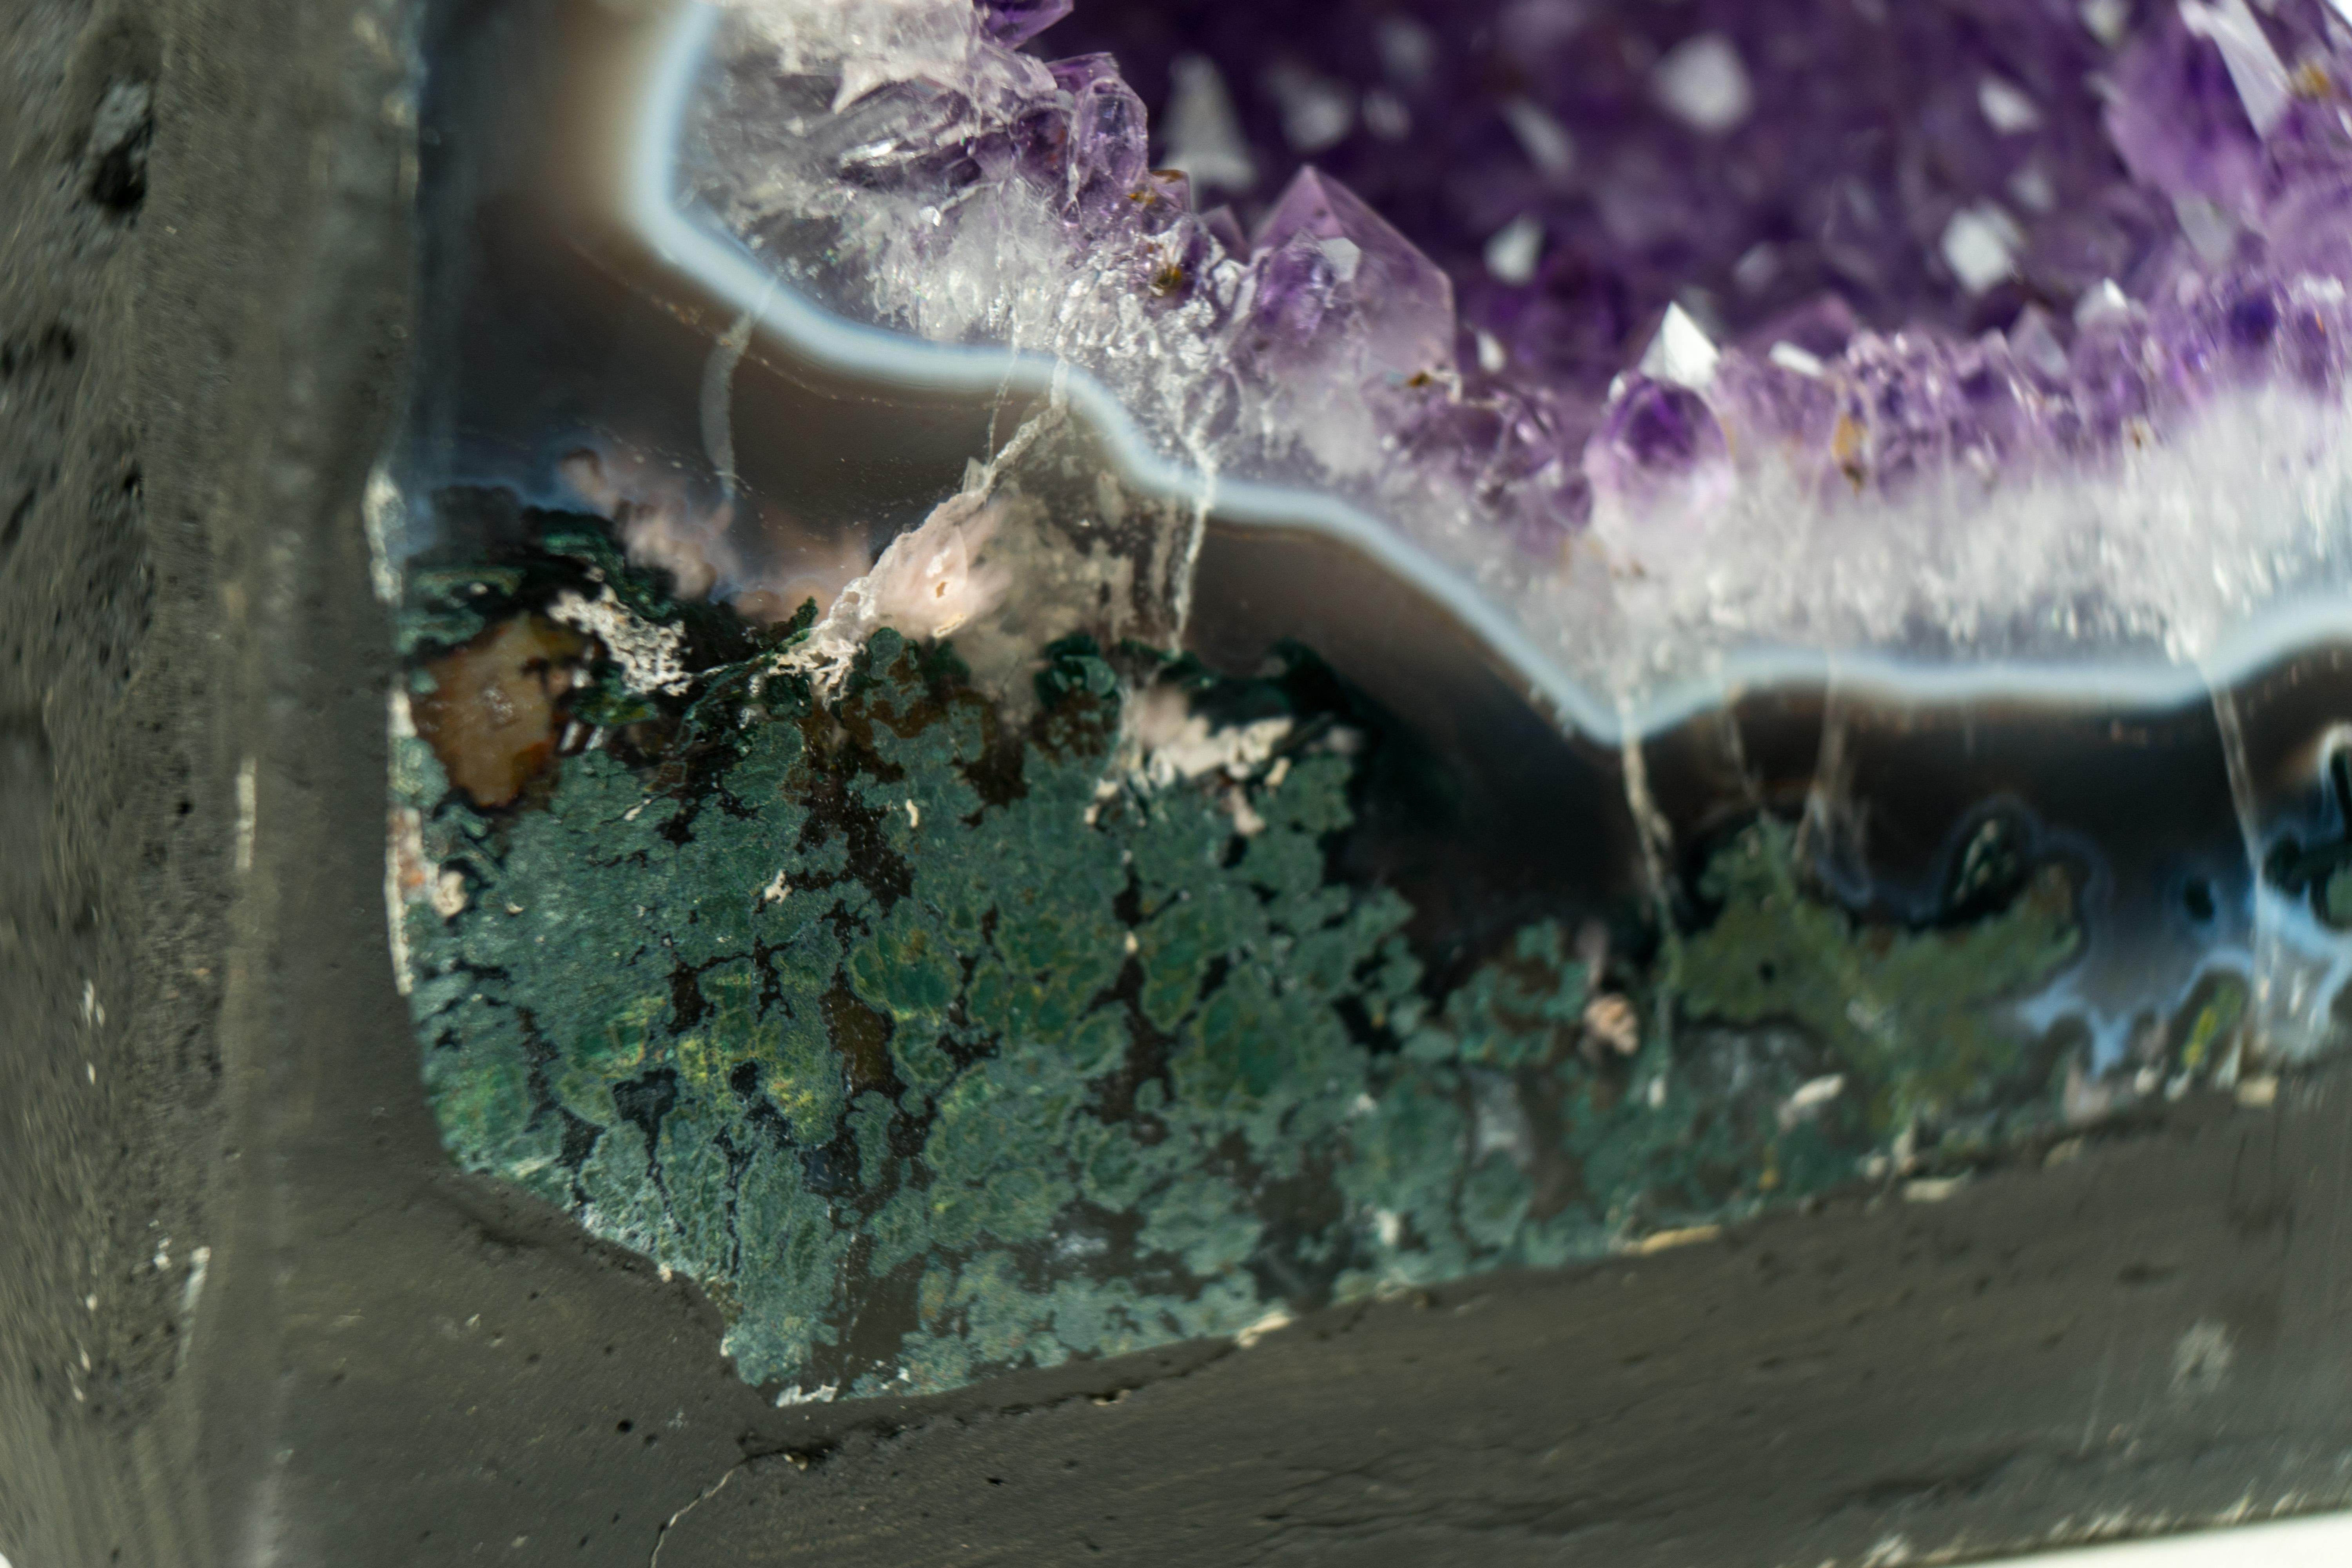 An Agate with Amethyst geode cathedral that is adorned with special characteristics, such as delicate agate laces and shimmering lavender amethyst, and if you're finding a captivating piece for your home, office, or crystal collection, this natural